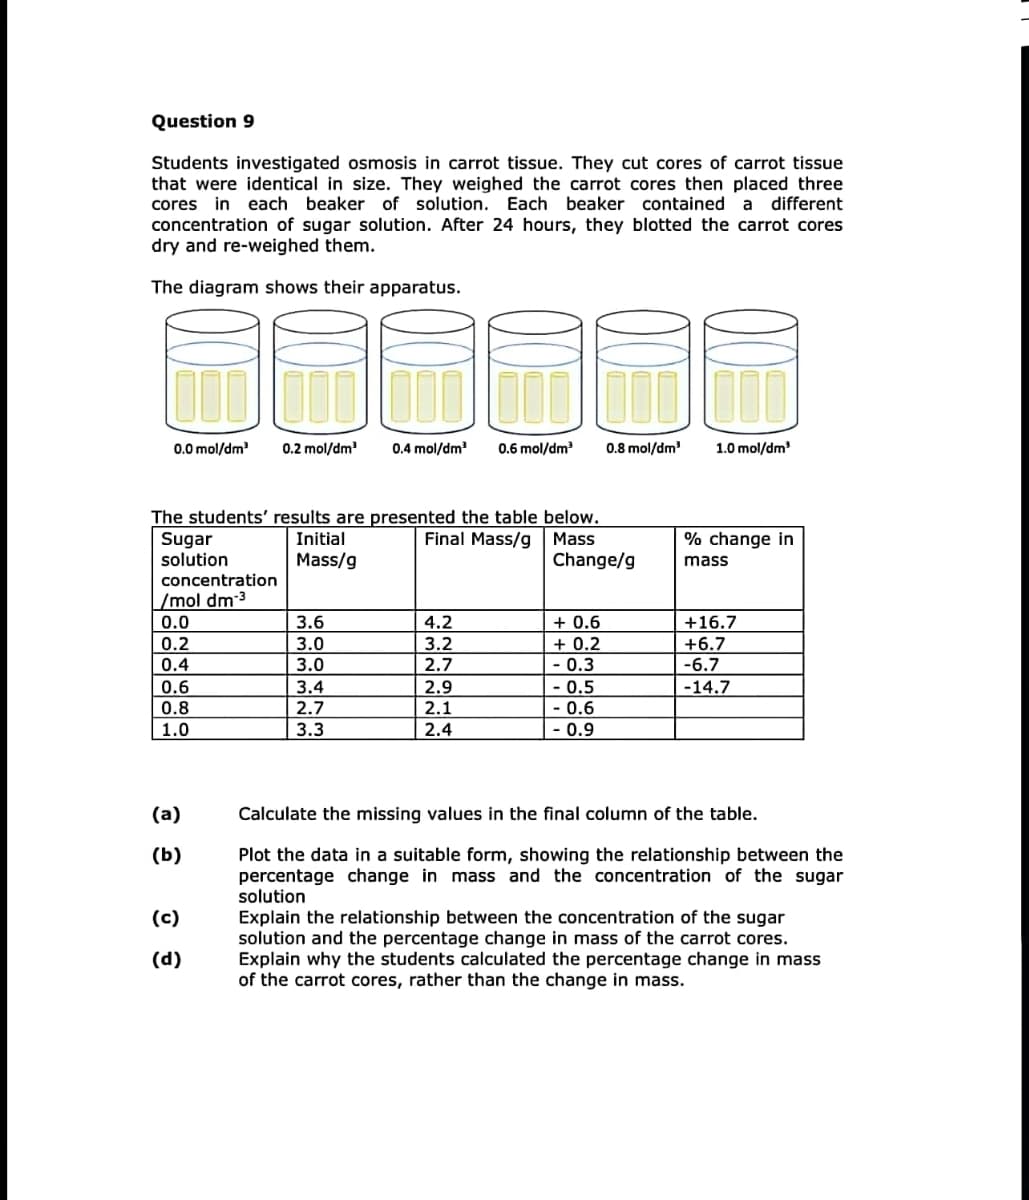 Question 9
Students investigated osmosis in carrot tissue. They cut cores of carrot tissue
that were identical in size. They weighed the carrot cores then placed three
cores in each beaker of solution. Each beaker contained a different
concentration of sugar solution. After 24 hours, they blotted the carrot cores
dry and re-weighed them.
The diagram shows their apparatus.
0.0 mol/dm³ 0.2 mol/dm³ 0.4 mol/dm³ 0.6 mol/dm³ 0.8 mol/dm³
The students' results are presented the table below.
Final Mass/g
Mass
Change/g
Sugar
solution
concentration
/mol dm-3
0.0
0.2
0.4
0.6
0.8
1.0
(a)
(b)
(c)
(d)
Initial
Mass/g
3.6
3.0
3.0
3.4
2.7
3.3
4.2
3.2
2.7
2.9
2.1
2.4
+ 0.6
+0.2
-0.3
-0.5
-0.6
- 0.9
1.0 mol/dm³
% change in
mass
+16.7
+6.7
-6.7
-14.7
Calculate the missing values in the final column of the table.
Plot the data in a suitable form, showing the relationship between the
percentage change in mass and the concentration of the sugar
solution
Explain the relationship between the concentration of the sugar
solution and the percentage change in mass of the carrot cores.
Explain why the students calculated the percentage change in mass
of the carrot cores, rather than the change in mass.